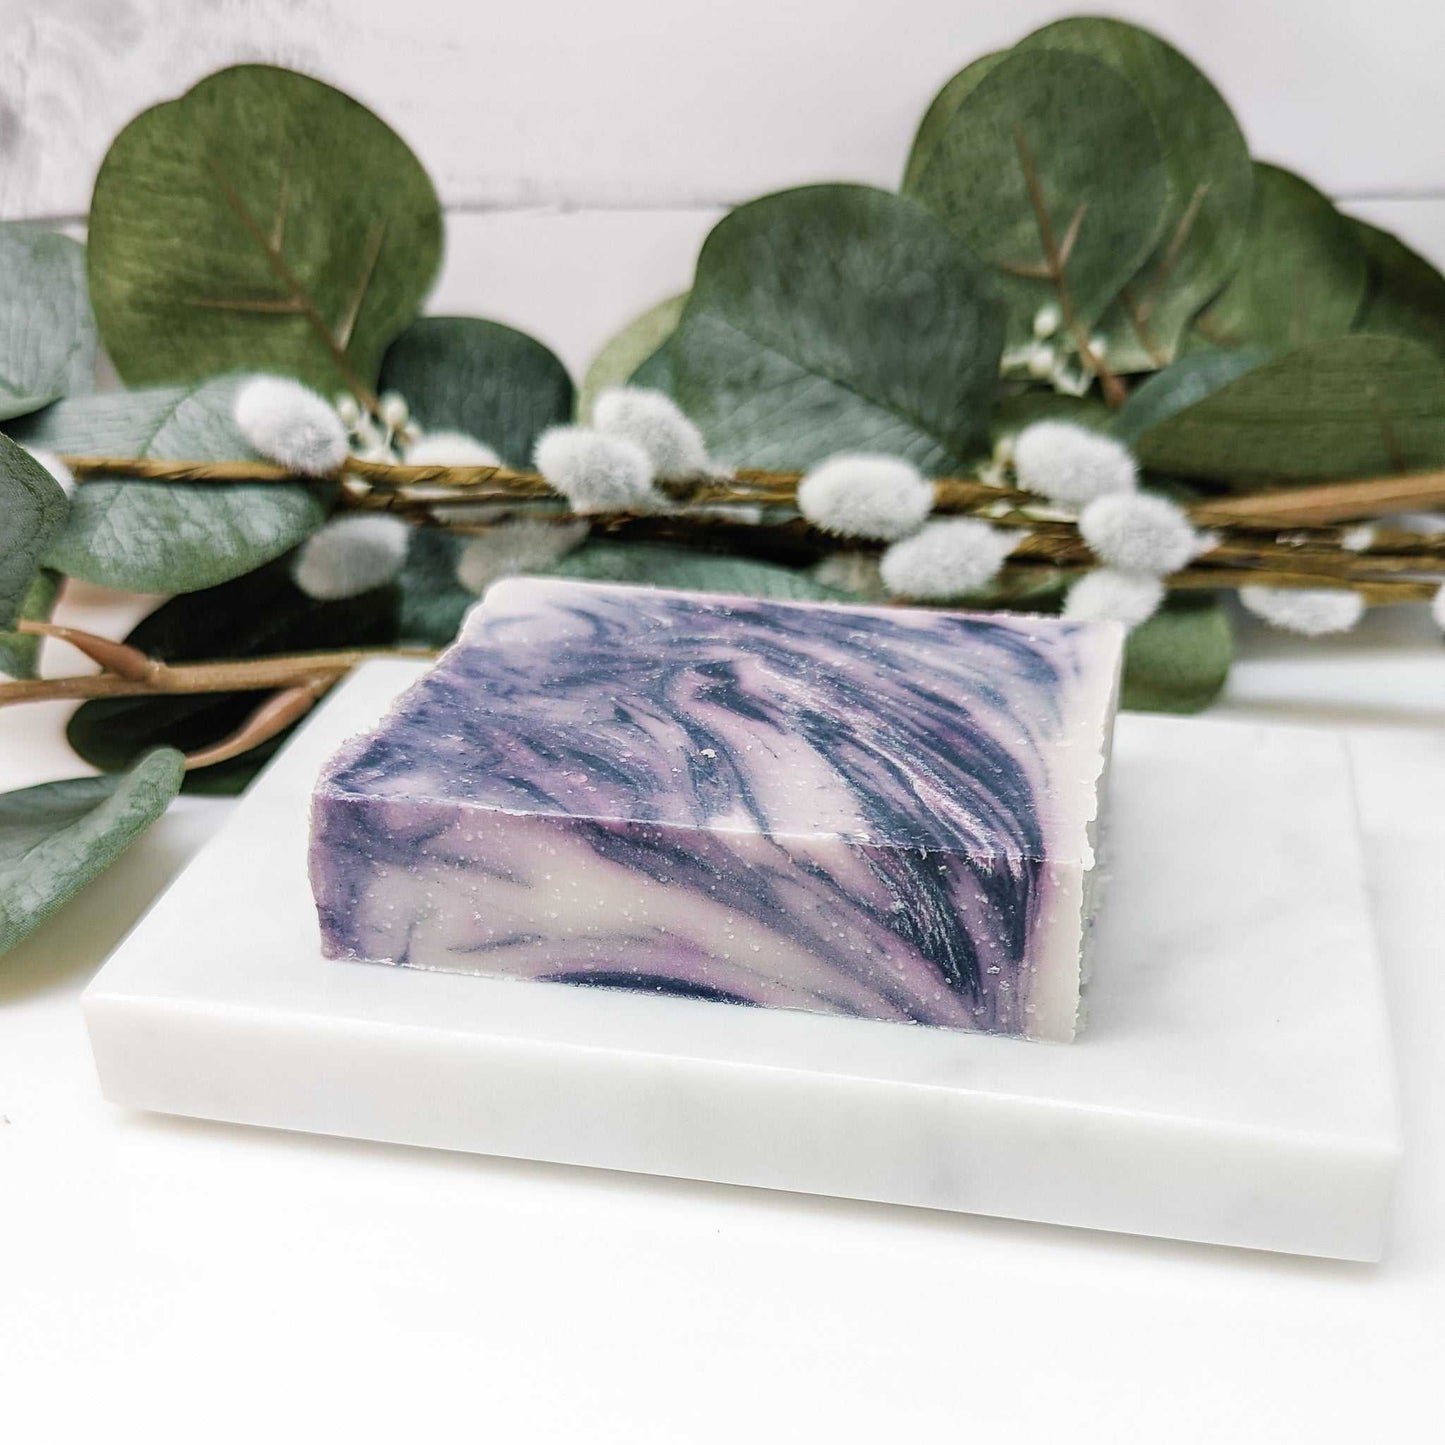 Natural skincare luxury encapsulated in CG Pure Wash's Coconut Lime Soap Bars, cold-pressed to preserve the benefits of its wholesome ingredients